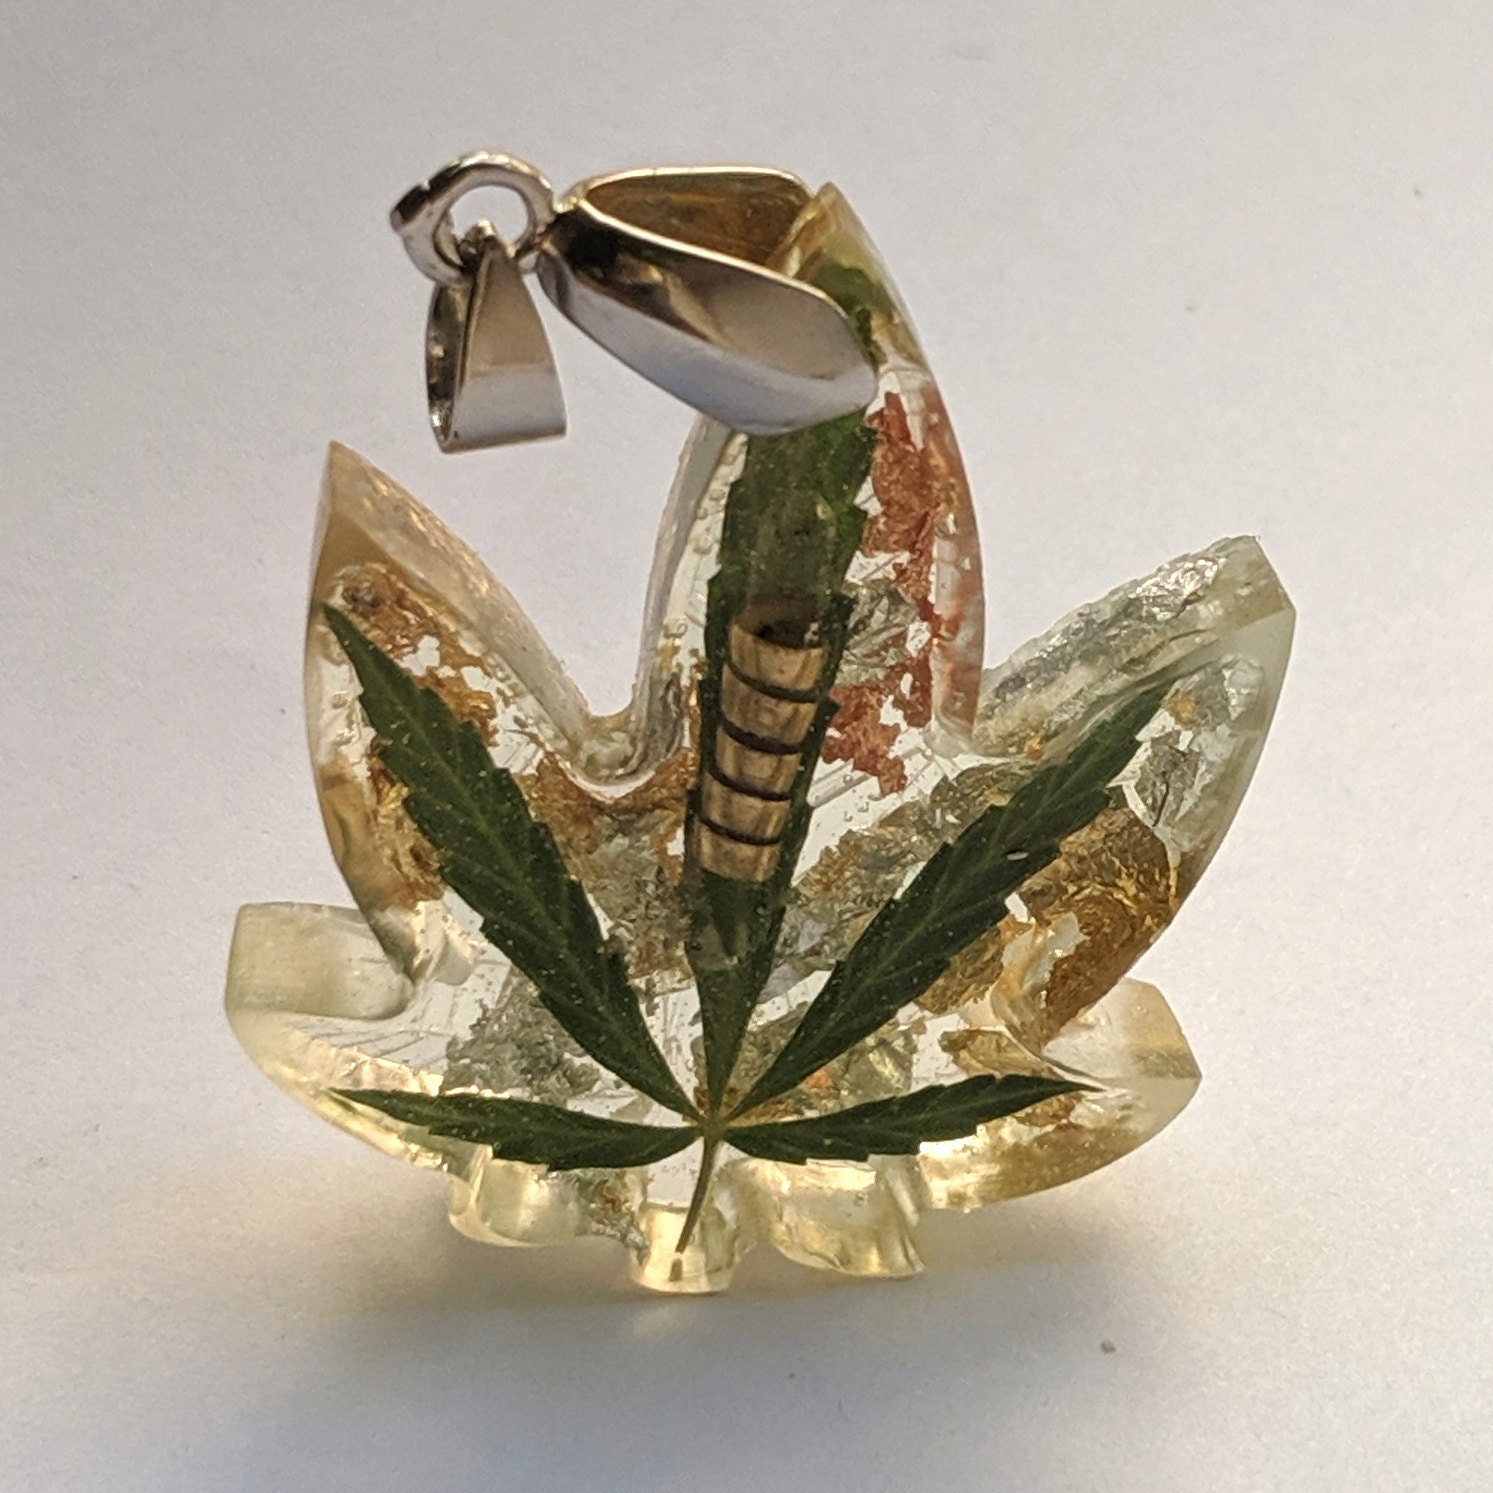 Humboldt county OG kush strain Cannabis and silver leaf rings and Wedding sets